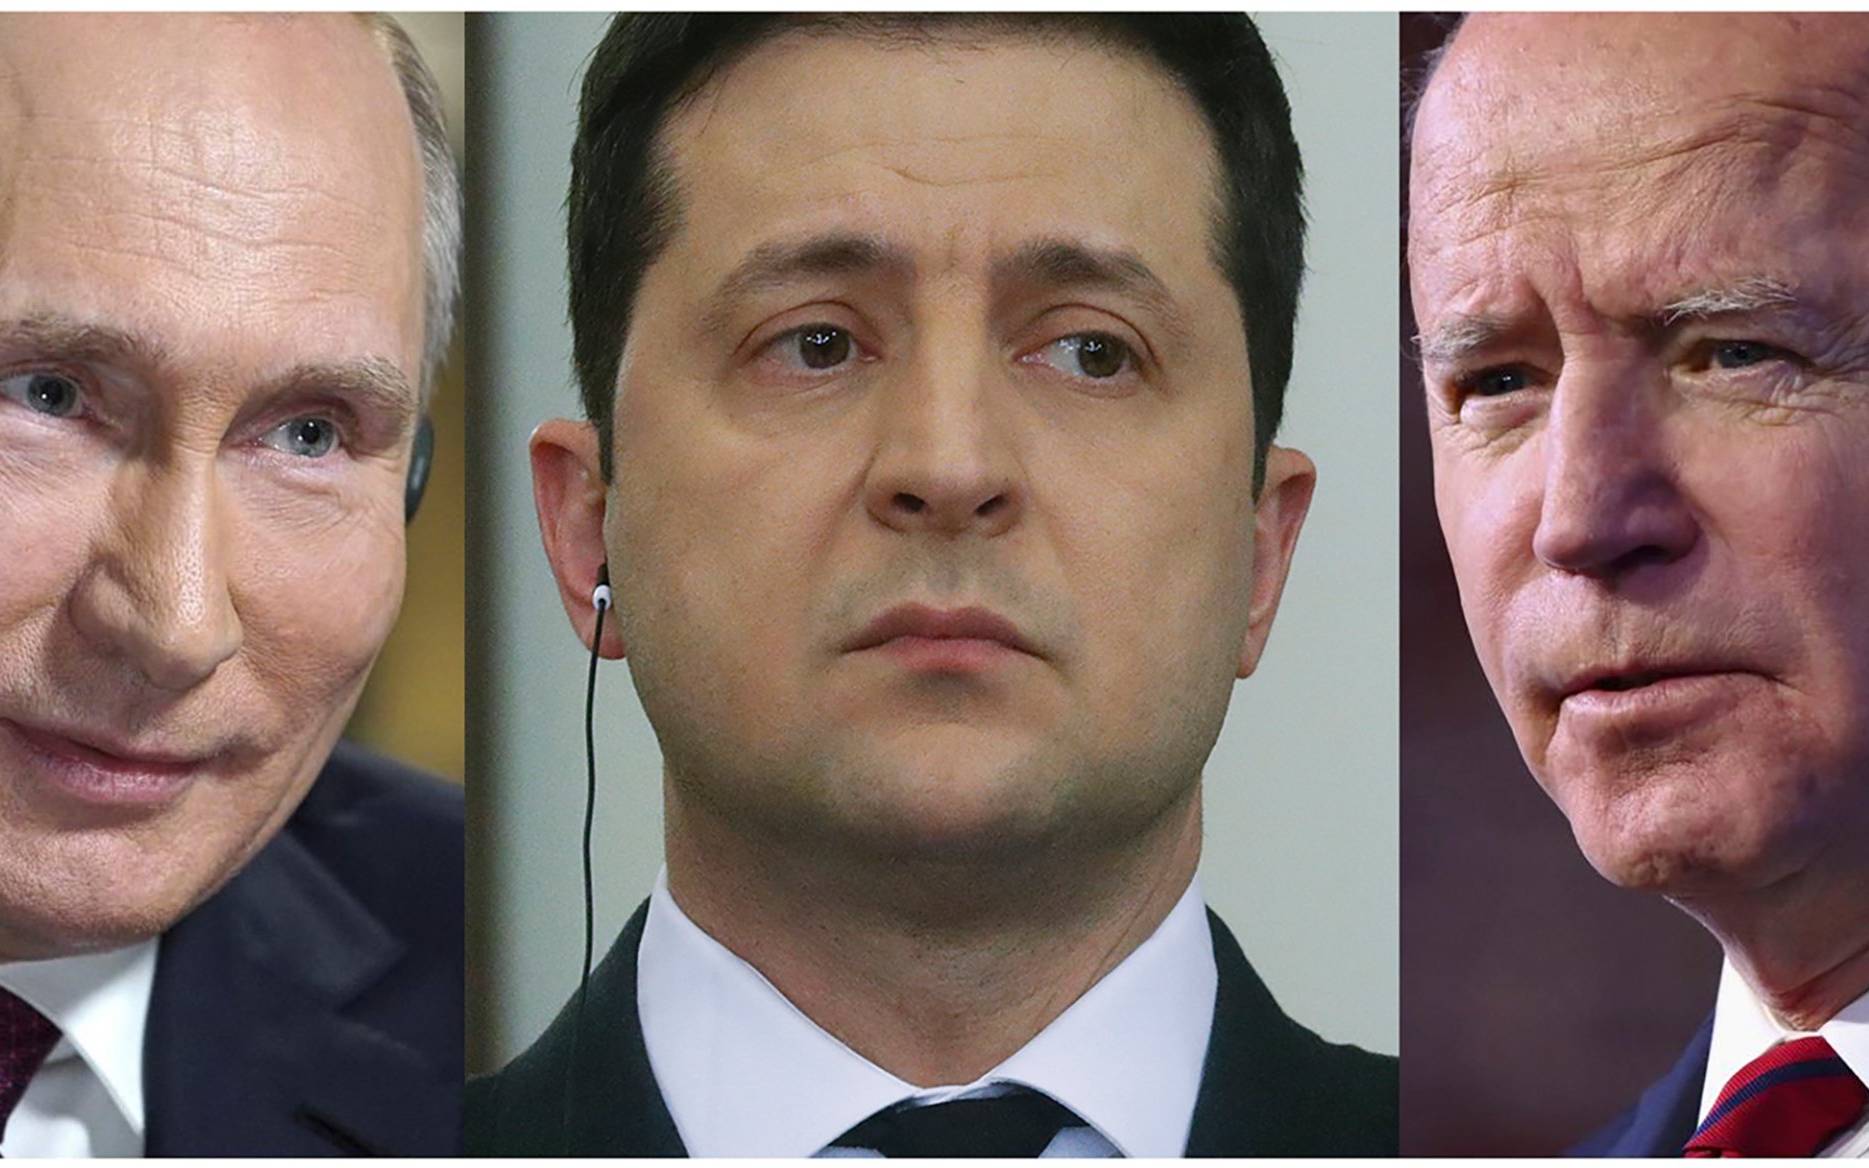 (FILES) This combination of pictures created on January 2, 2022 shows Russia's President Vladimir Putin at the Kremlin in Moscu on March 1, 2018, Ukrainian President Volodymyr Zelensky in Kiev on December 8, 2021 and US President Joe Biden in Wilmington, Delaware on January 15, 2021. - US President Joe Biden and his Ukrainian counterpart Volodymyr Zelensky are due to speak by phone on January 2, 2022, amid growing fears that a Russian military buildup near the border with its pro-Western neighbor heralds an invasion.
The show of US support for Ukraine comes days after Biden warned Russian President Vladimir Putin of severe consequences if Moscow invades the former Soviet country. (Photo by AFP)